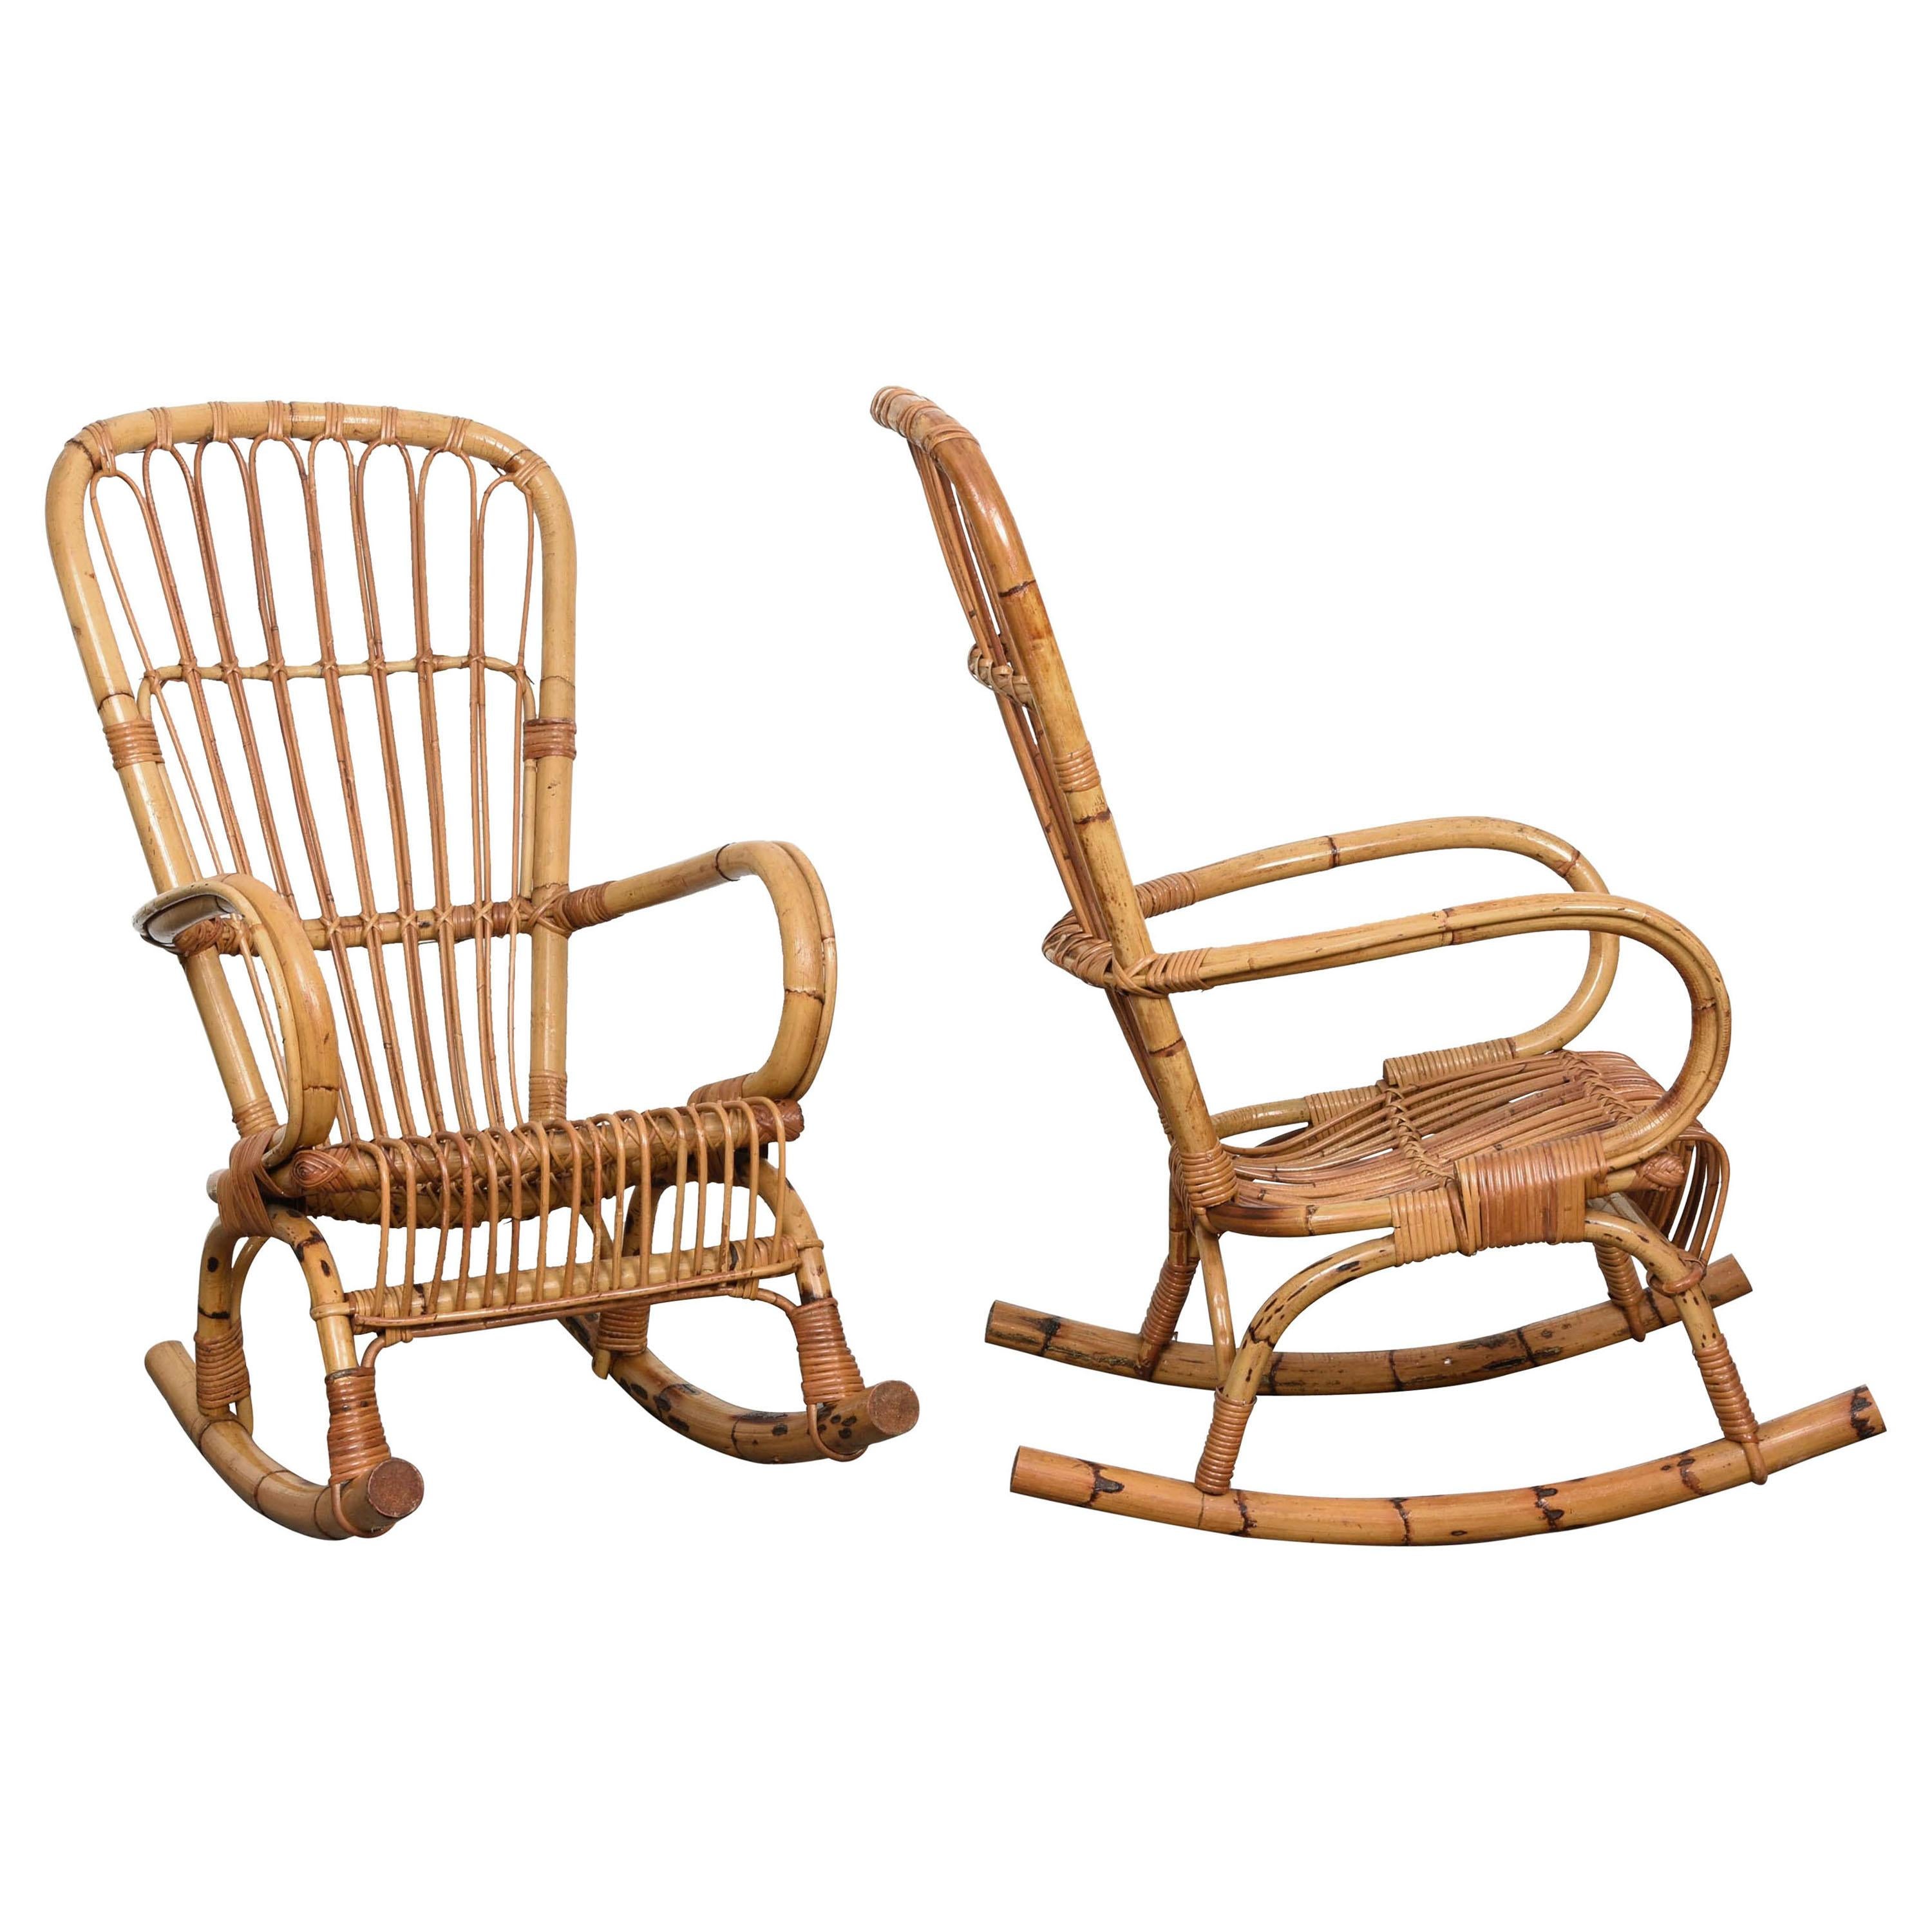 Pair of Midcentury Cote d'Azur Rattan and Bamboo Italian Rocking Chairs, 1960s For Sale